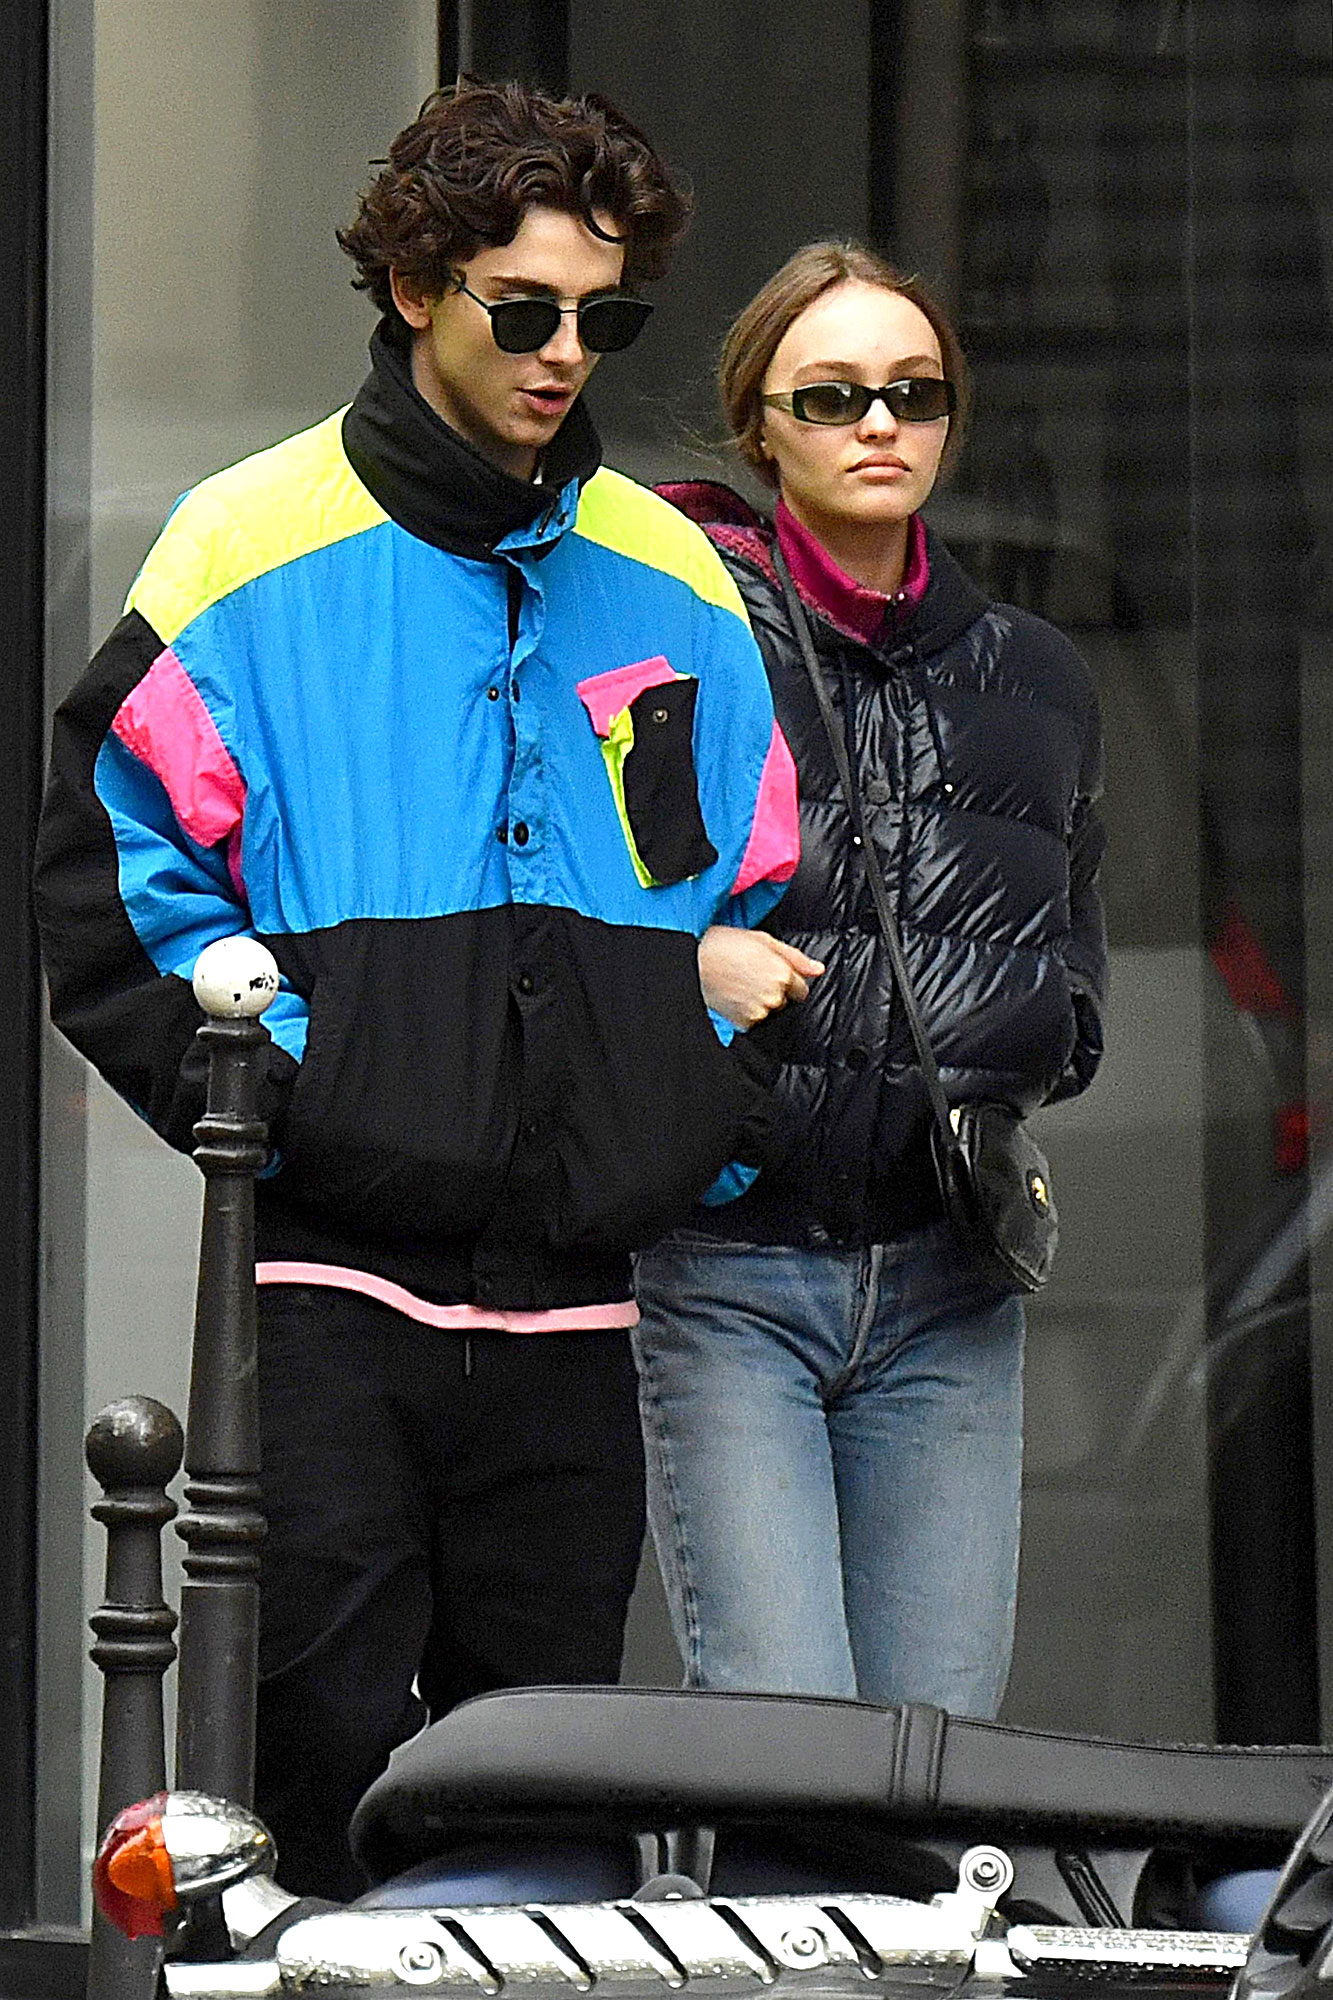 Lily-Rose Depp Hangs Out with Boyfriend Timothee Chalamet in NYC